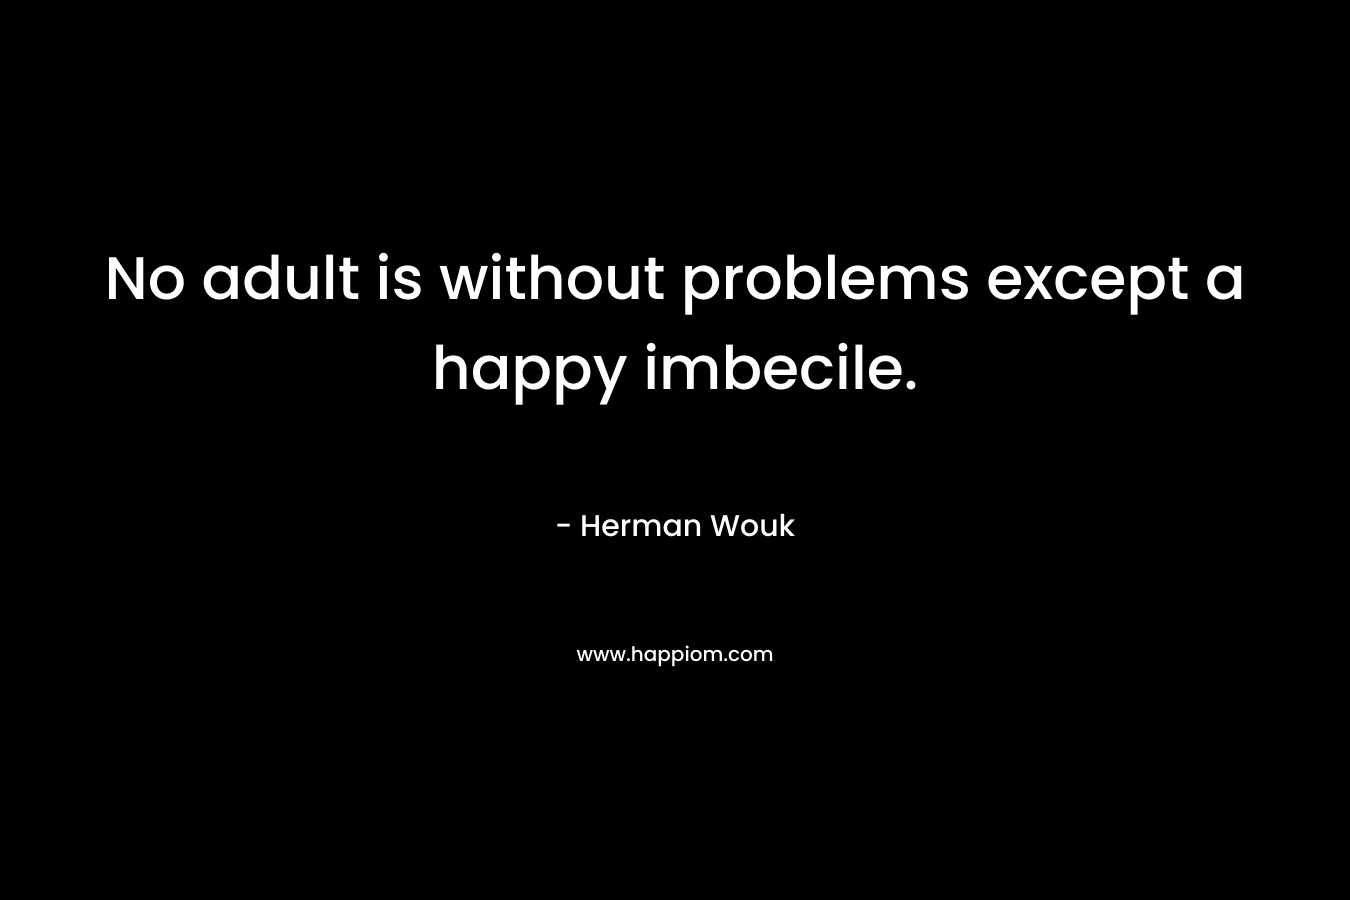 No adult is without problems except a happy imbecile. – Herman Wouk